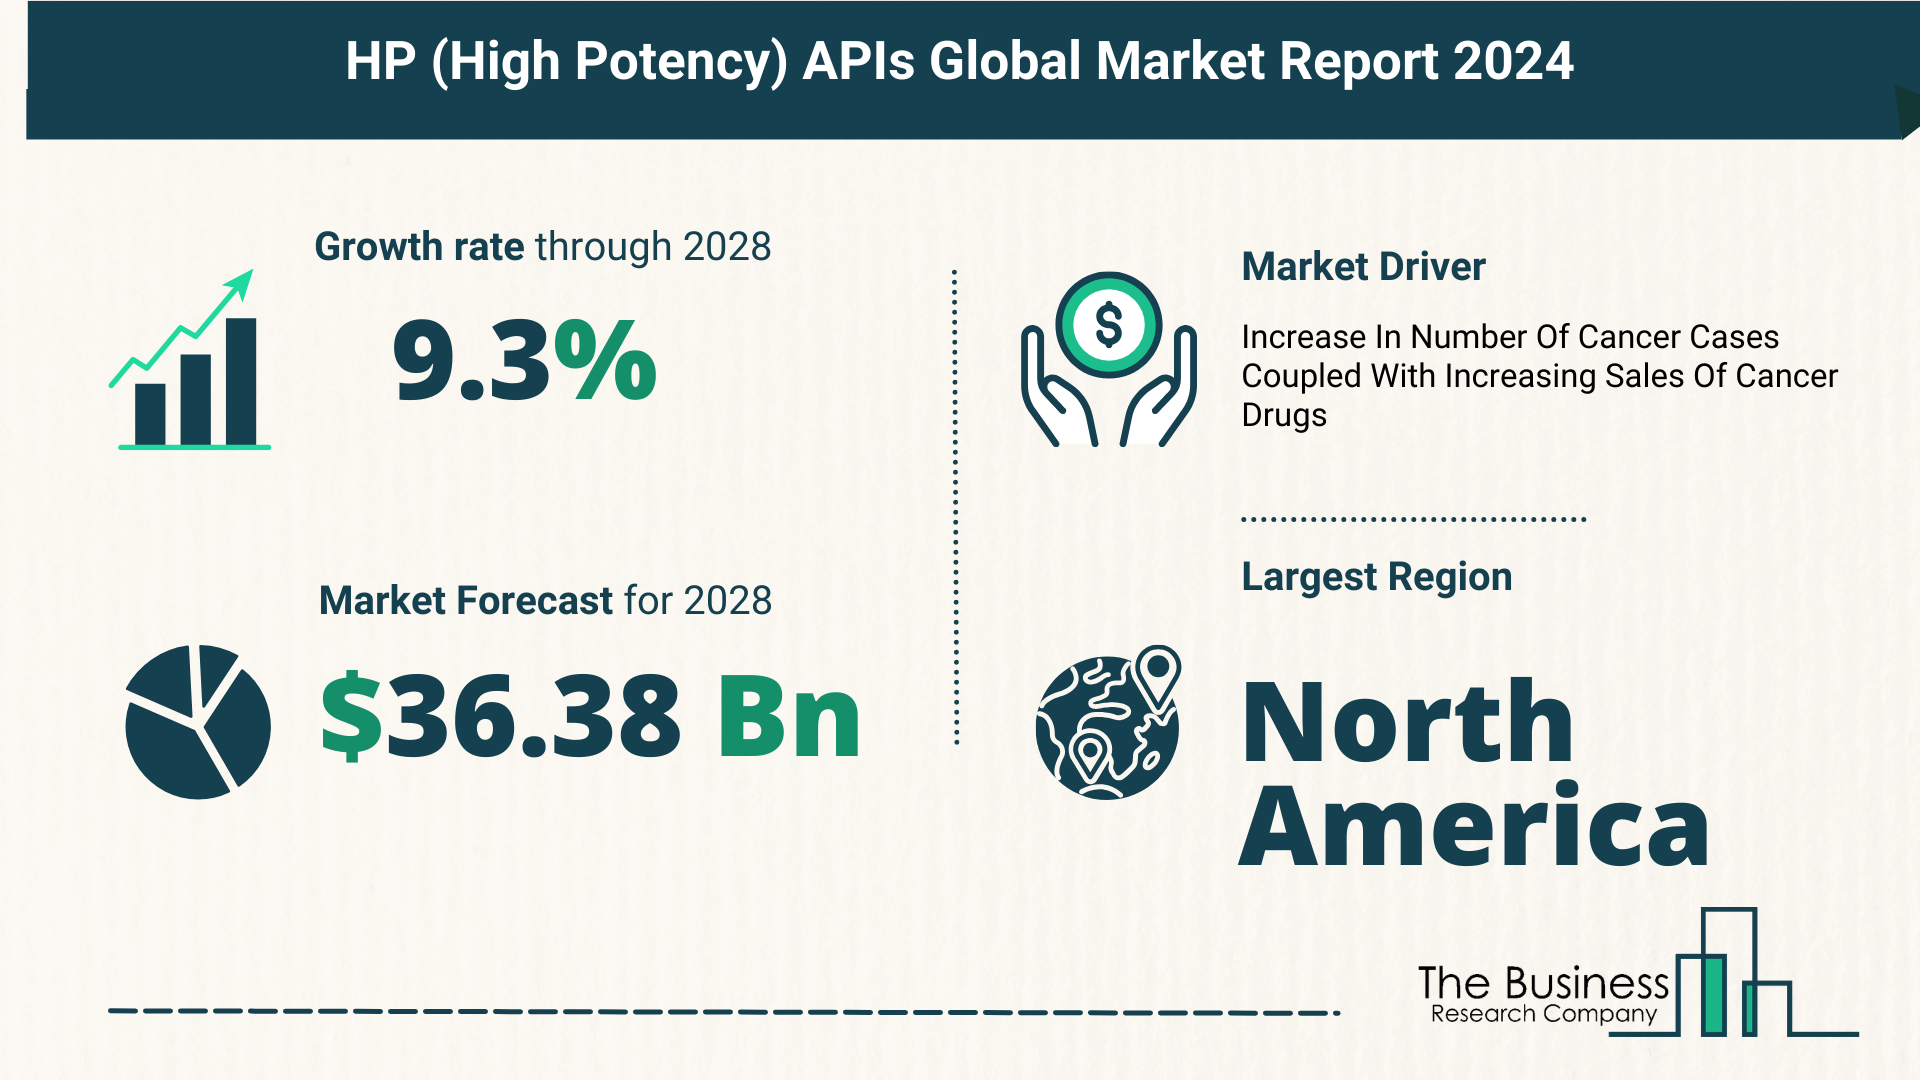 Key Takeaways From The Global HP (High Potency) APIs Market Forecast 2024